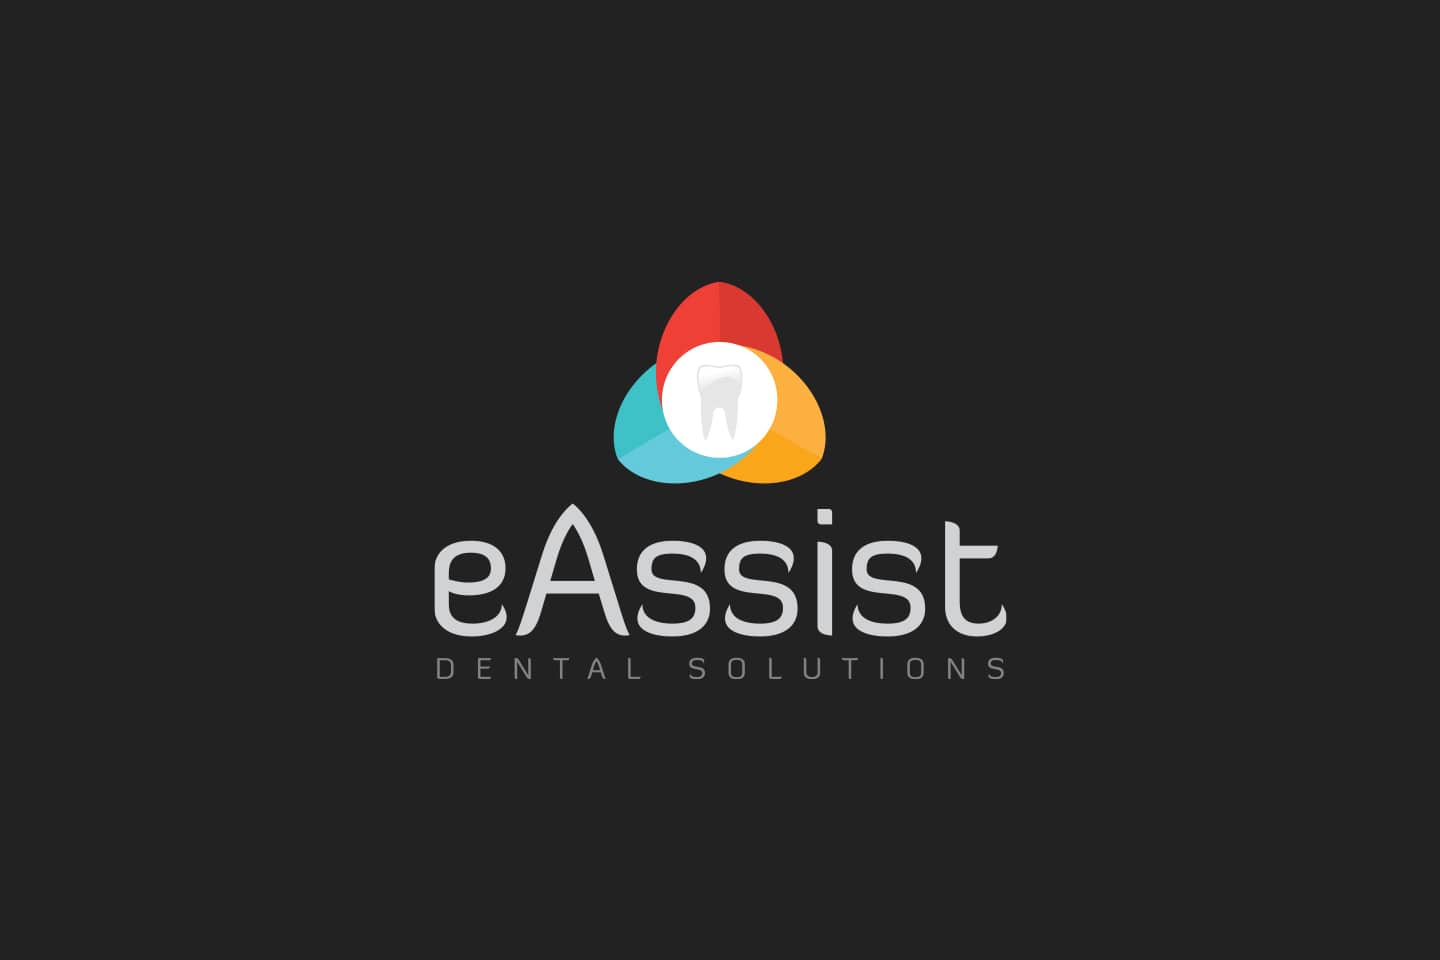 eAssist Logo - Dentistry is our passion, Accounting is our Specialty” - eAssist ...